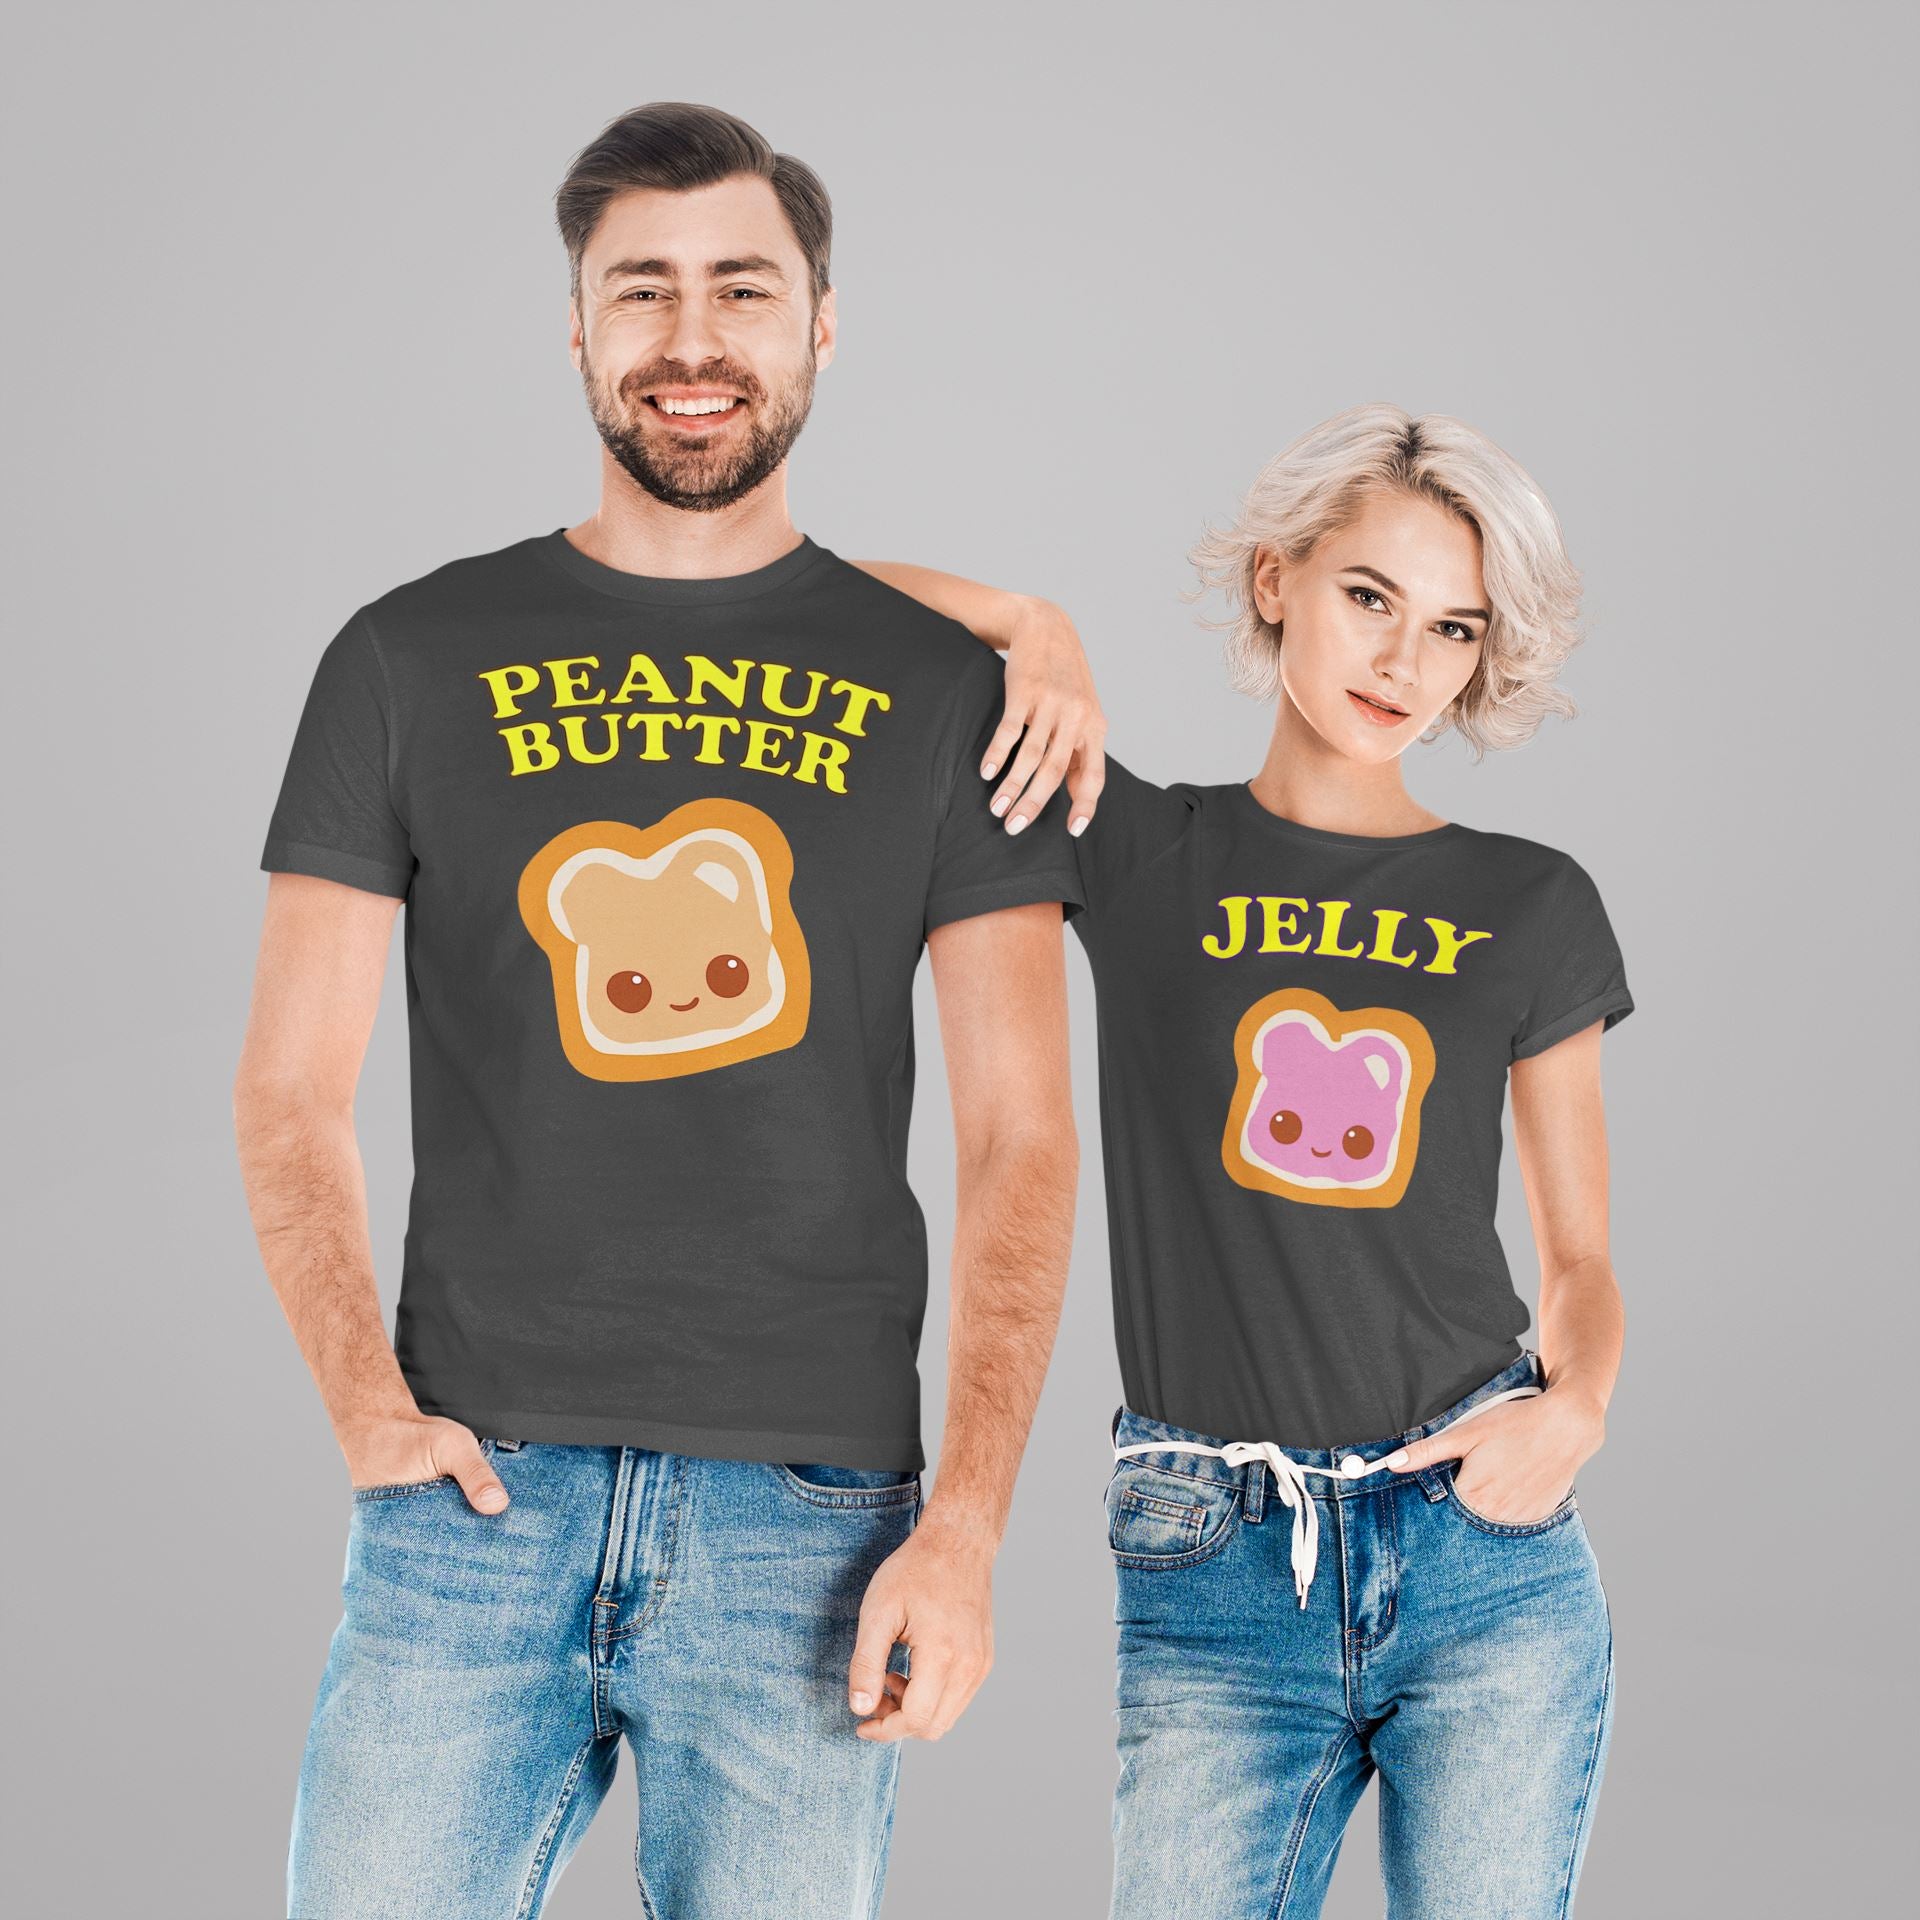 "Peanut Butter" Matching Couple and Friends T Shirt for Men and Women freeshipping - Catch My Drift India